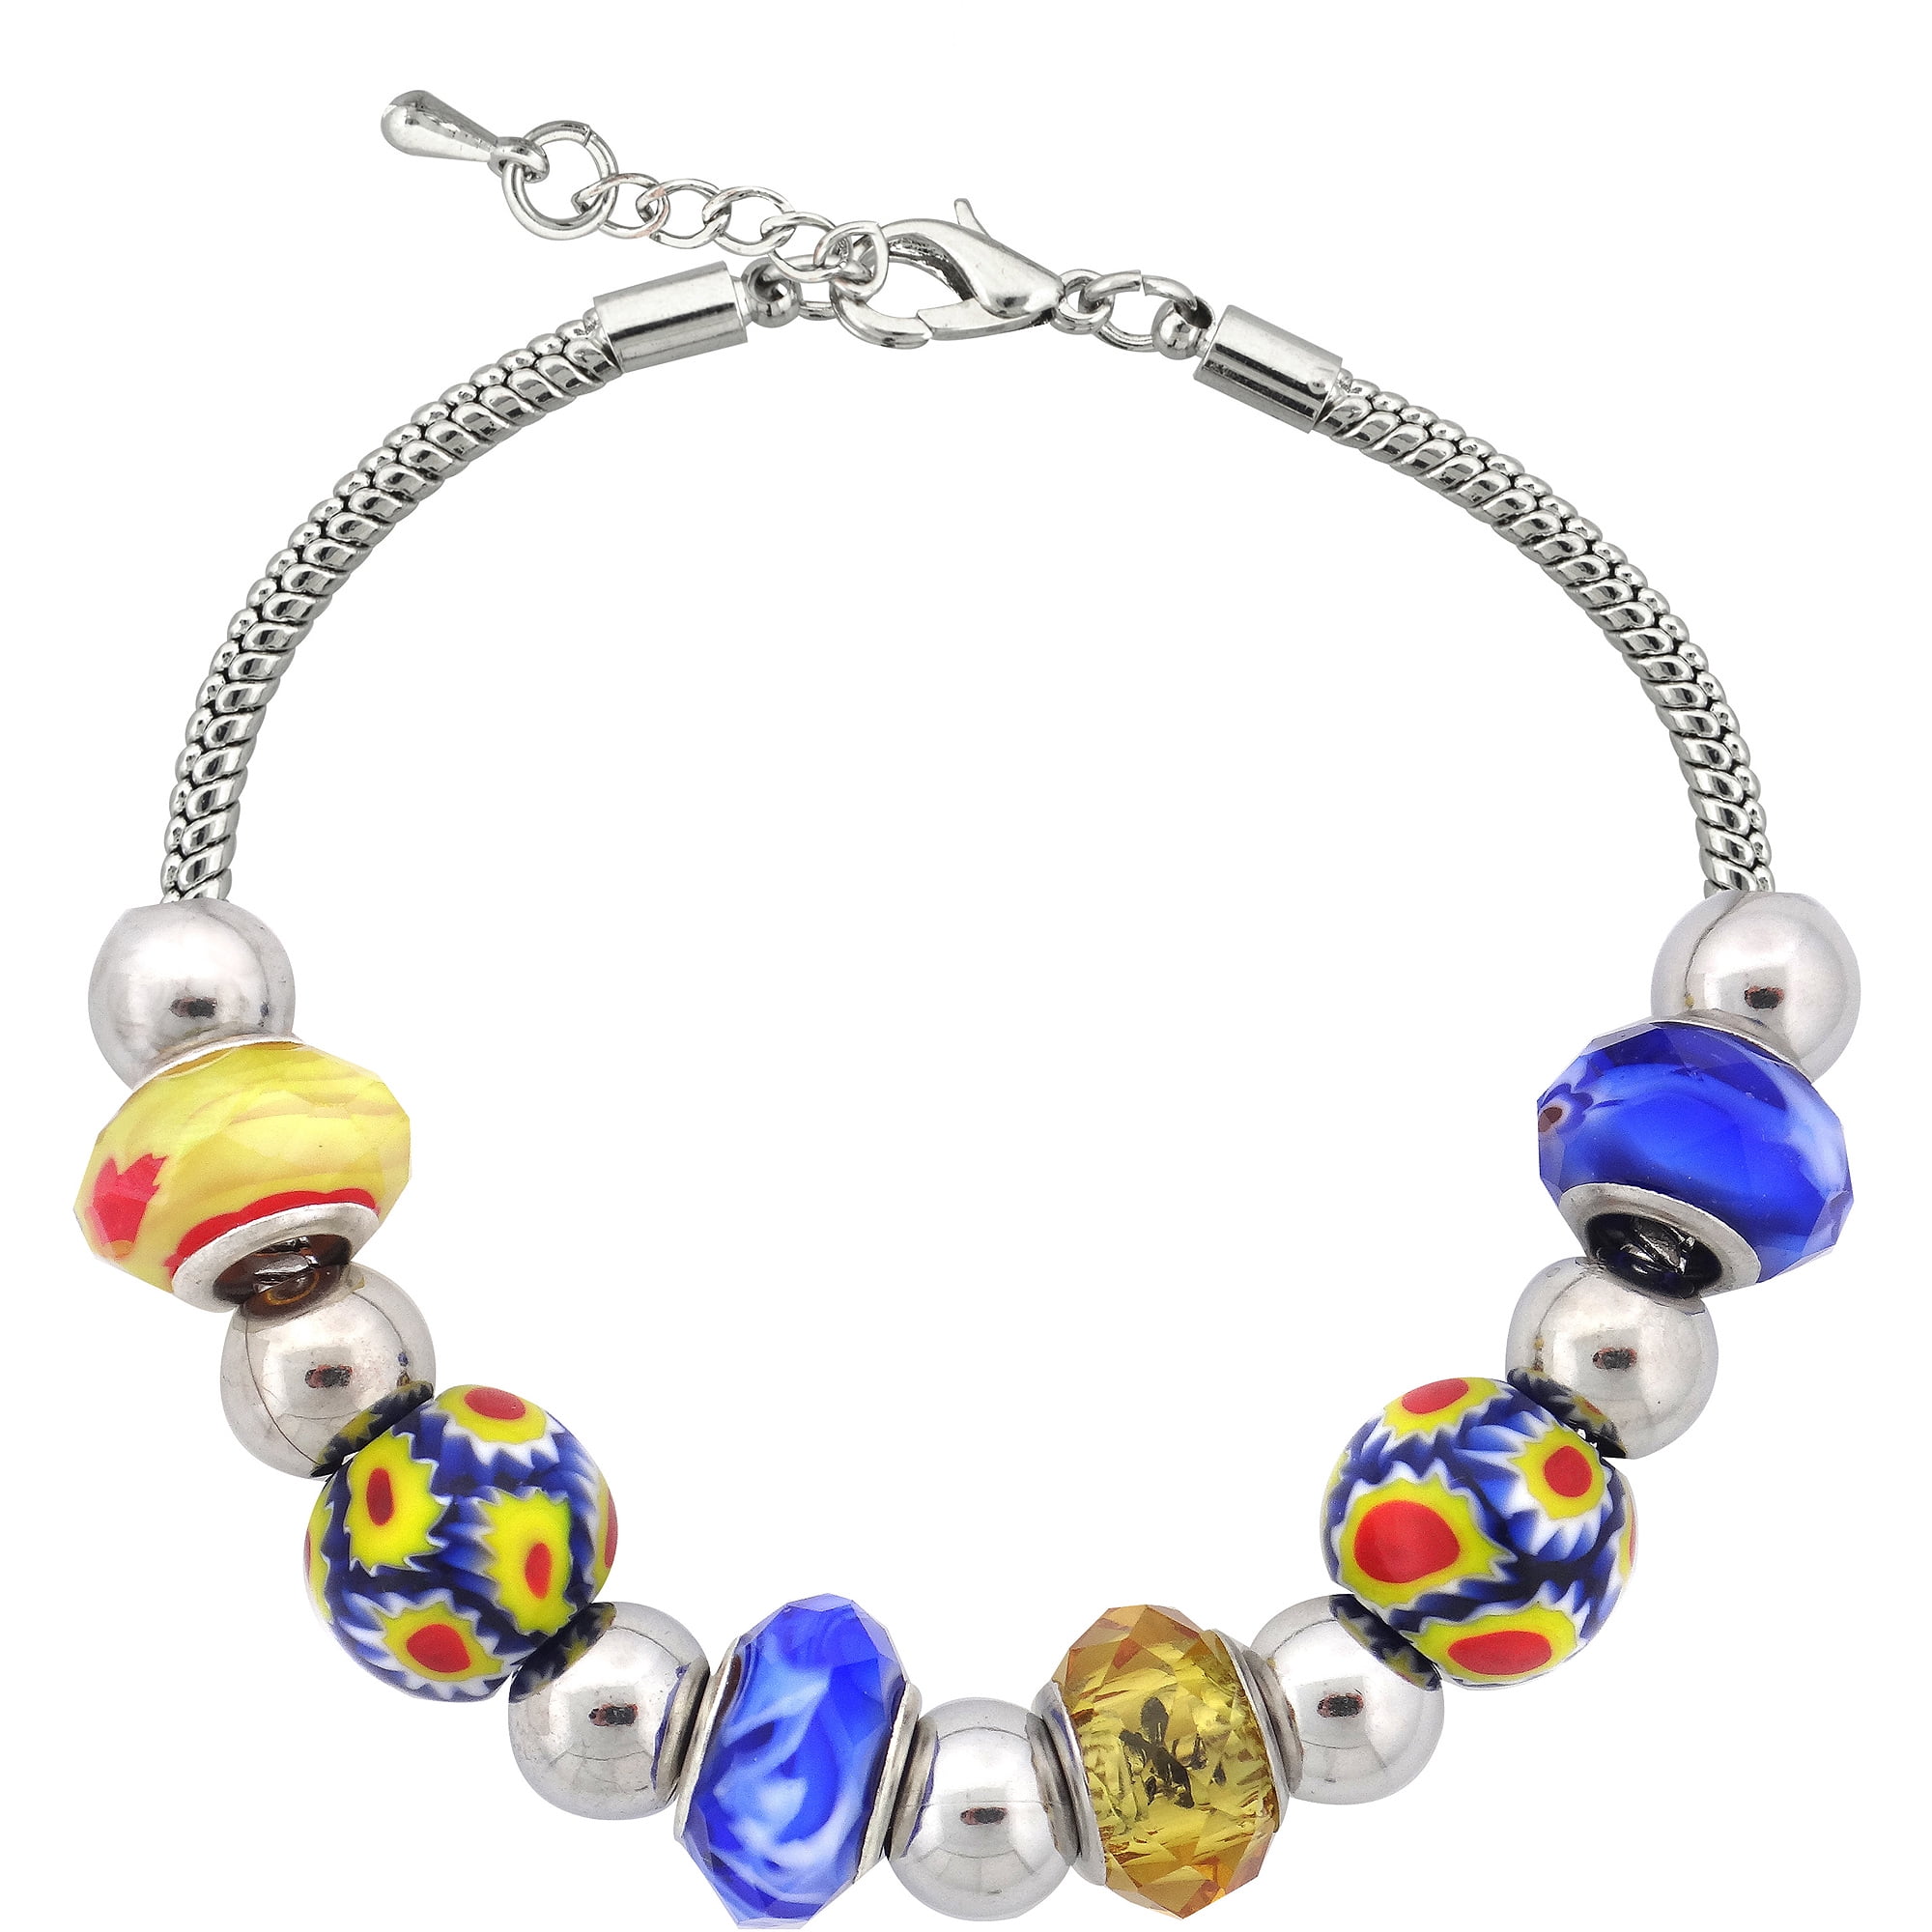 Yellow and Blue Colored Glass Lampwork Bead Bracelet